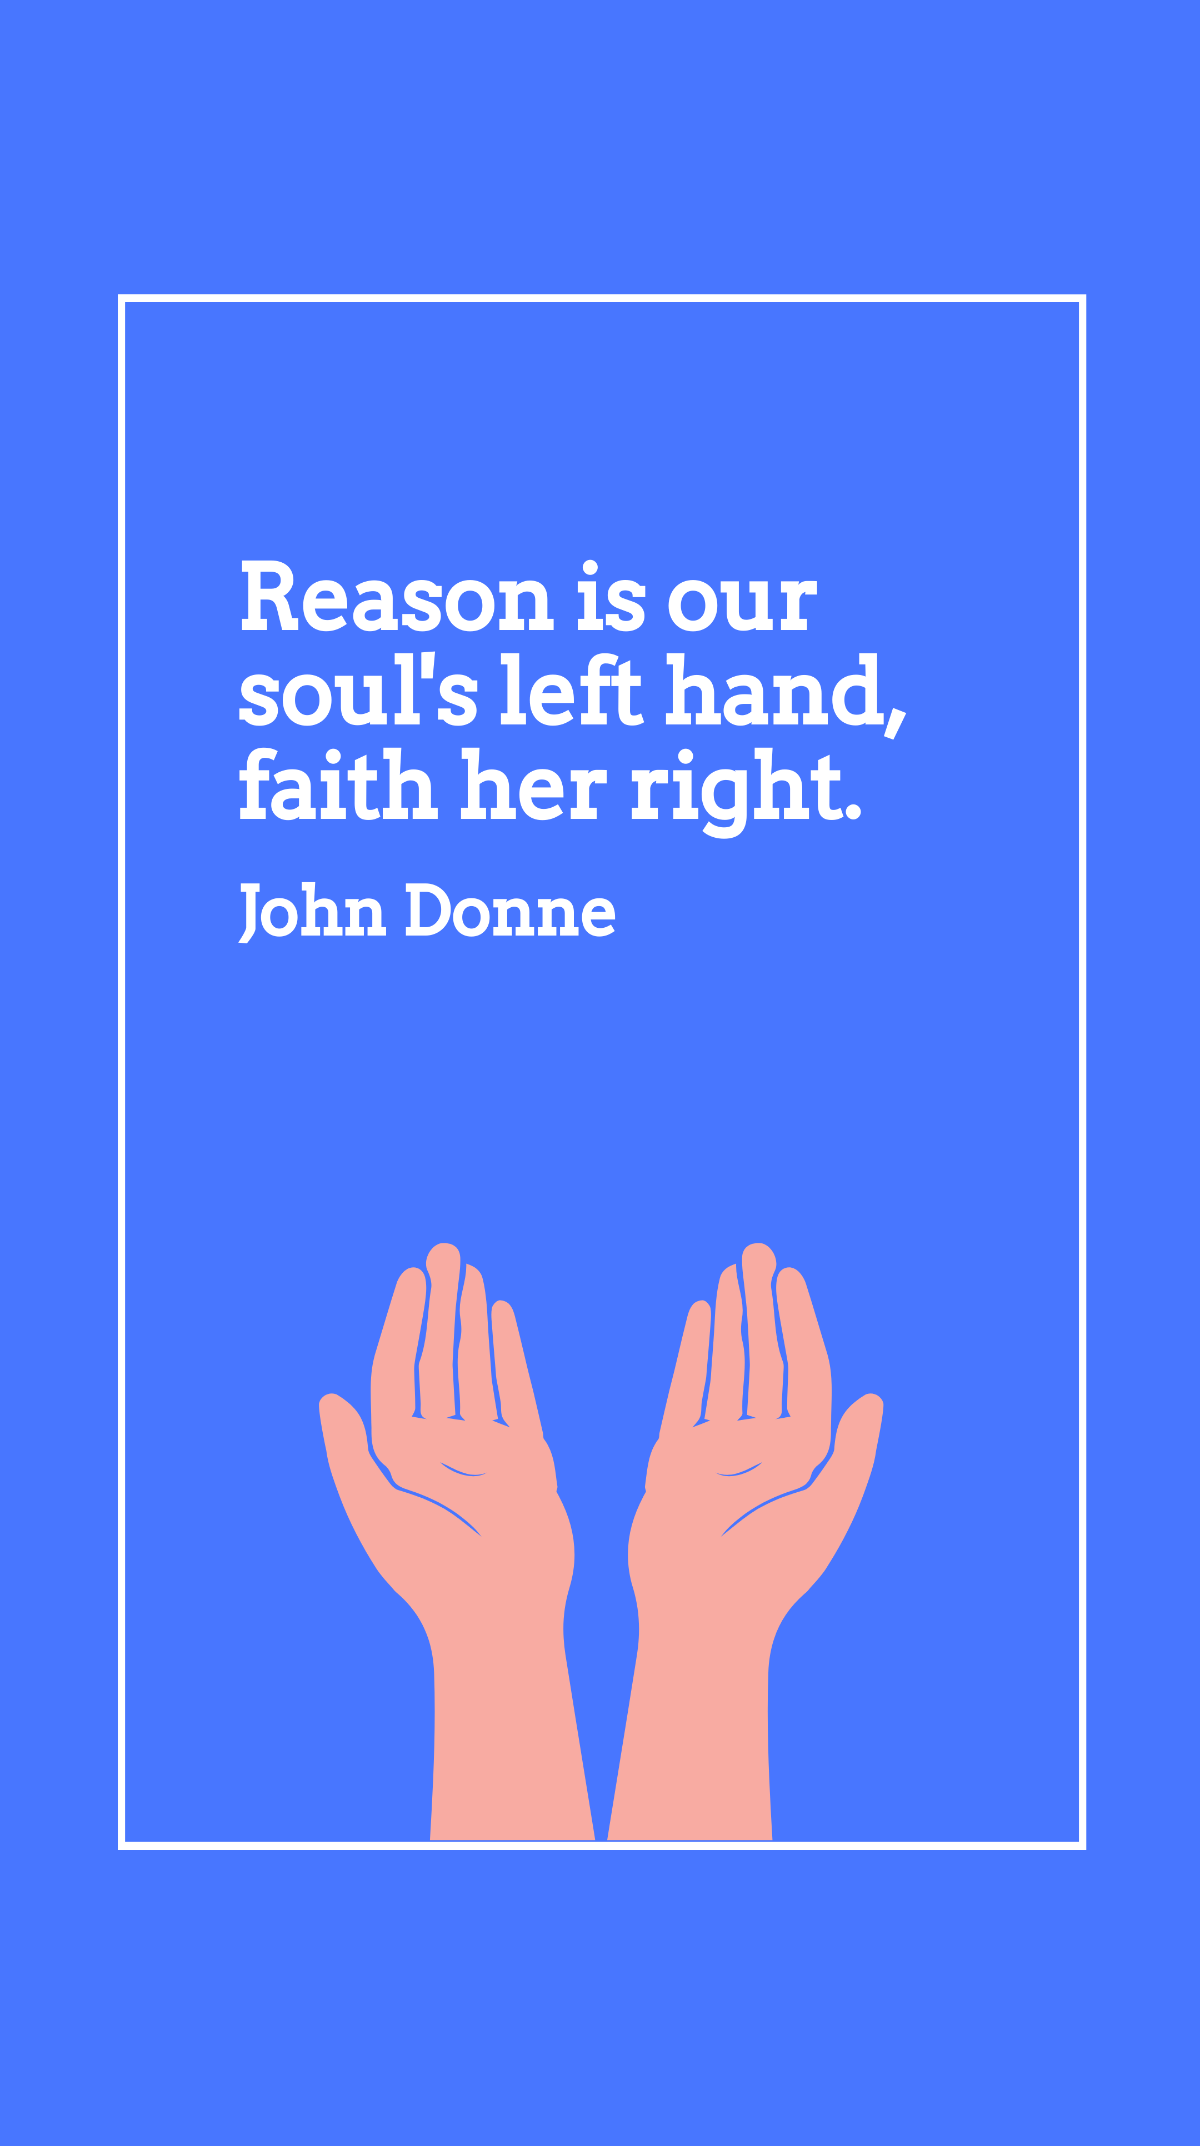 John Donne - Reason is our soul's left hand, faith her right. Template